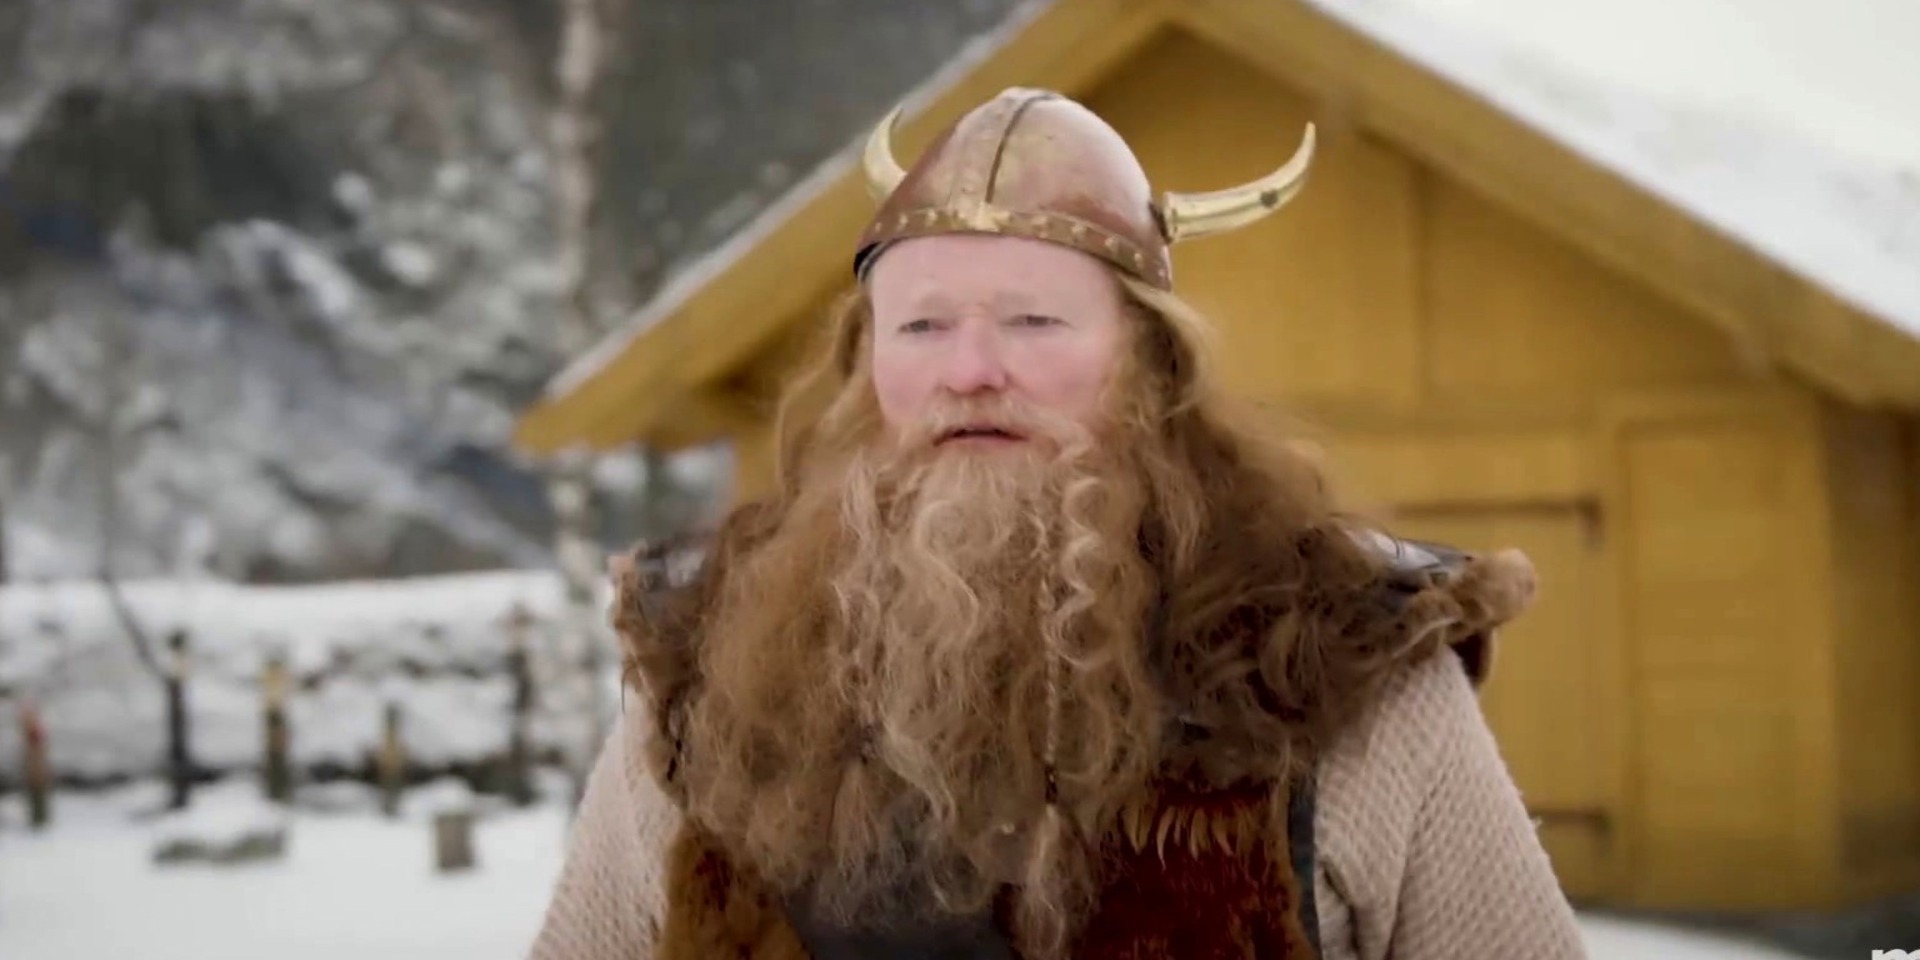 Conan O’Brien wears a Viking outfit while standing outside in the snow in this image from Conaco.